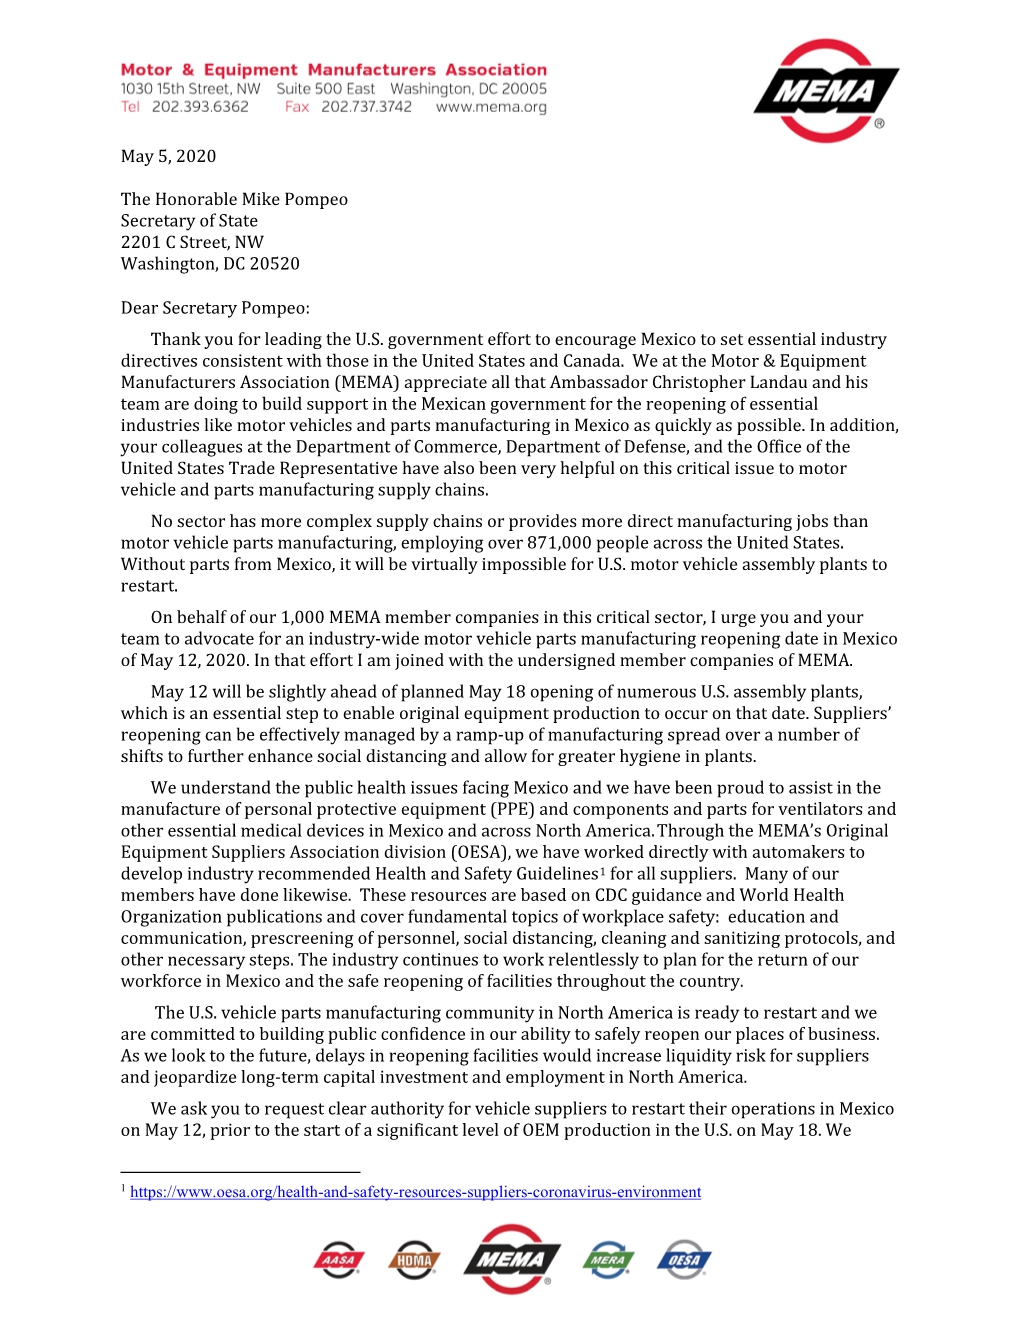 Letter to Secretary of State Mike Pompeo on Situation in Mexico May 5, 2020 Page 2 of 3